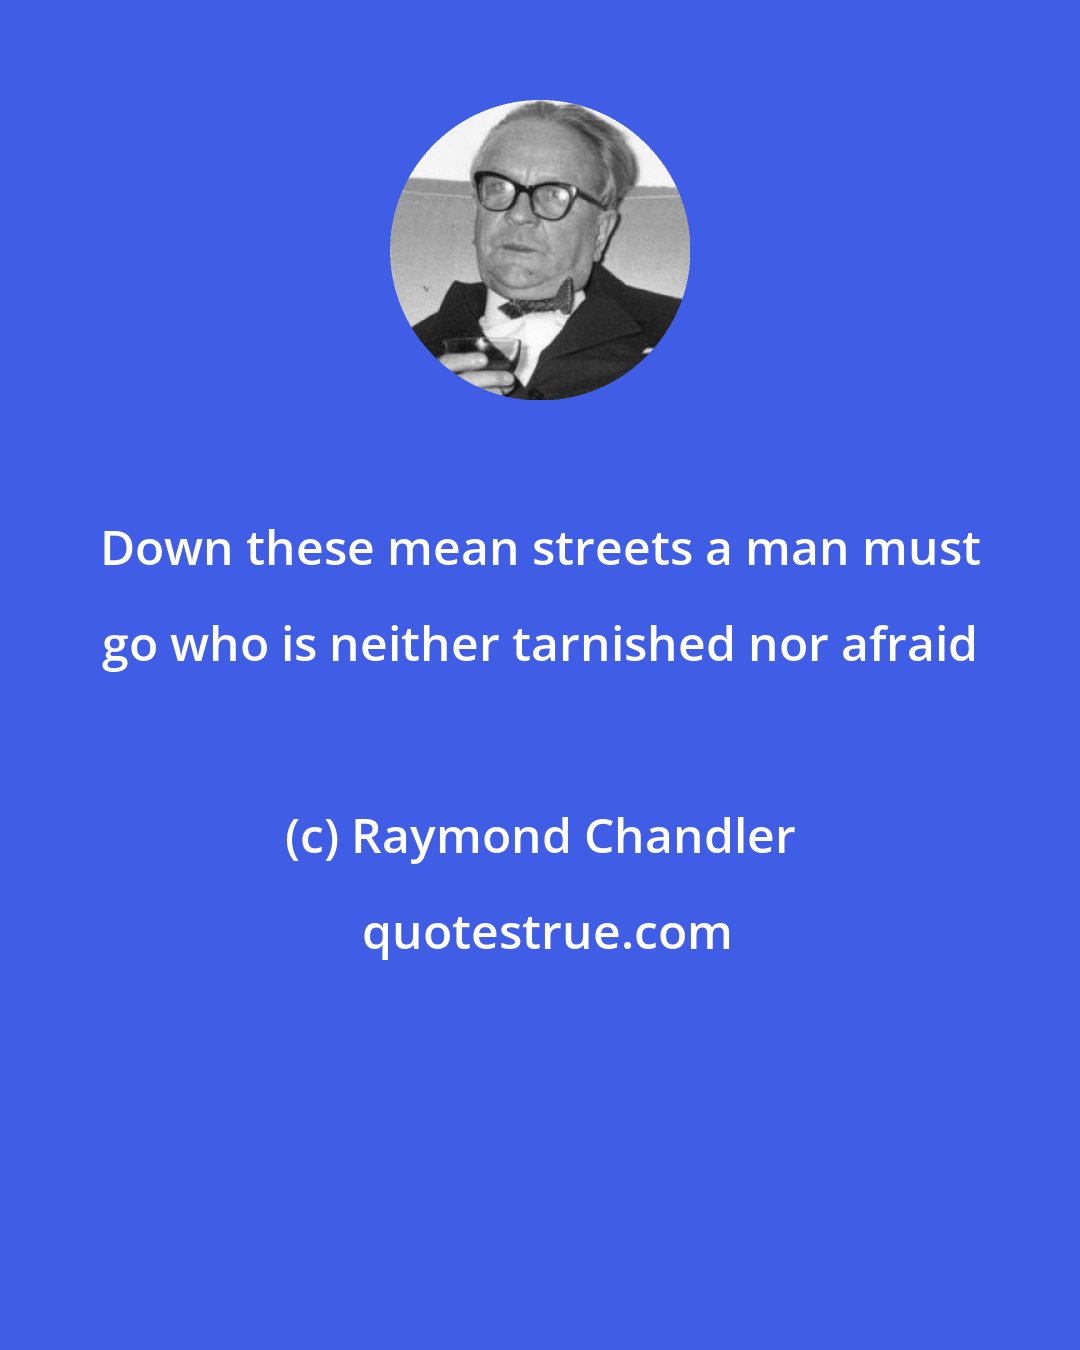 Raymond Chandler: Down these mean streets a man must go who is neither tarnished nor afraid